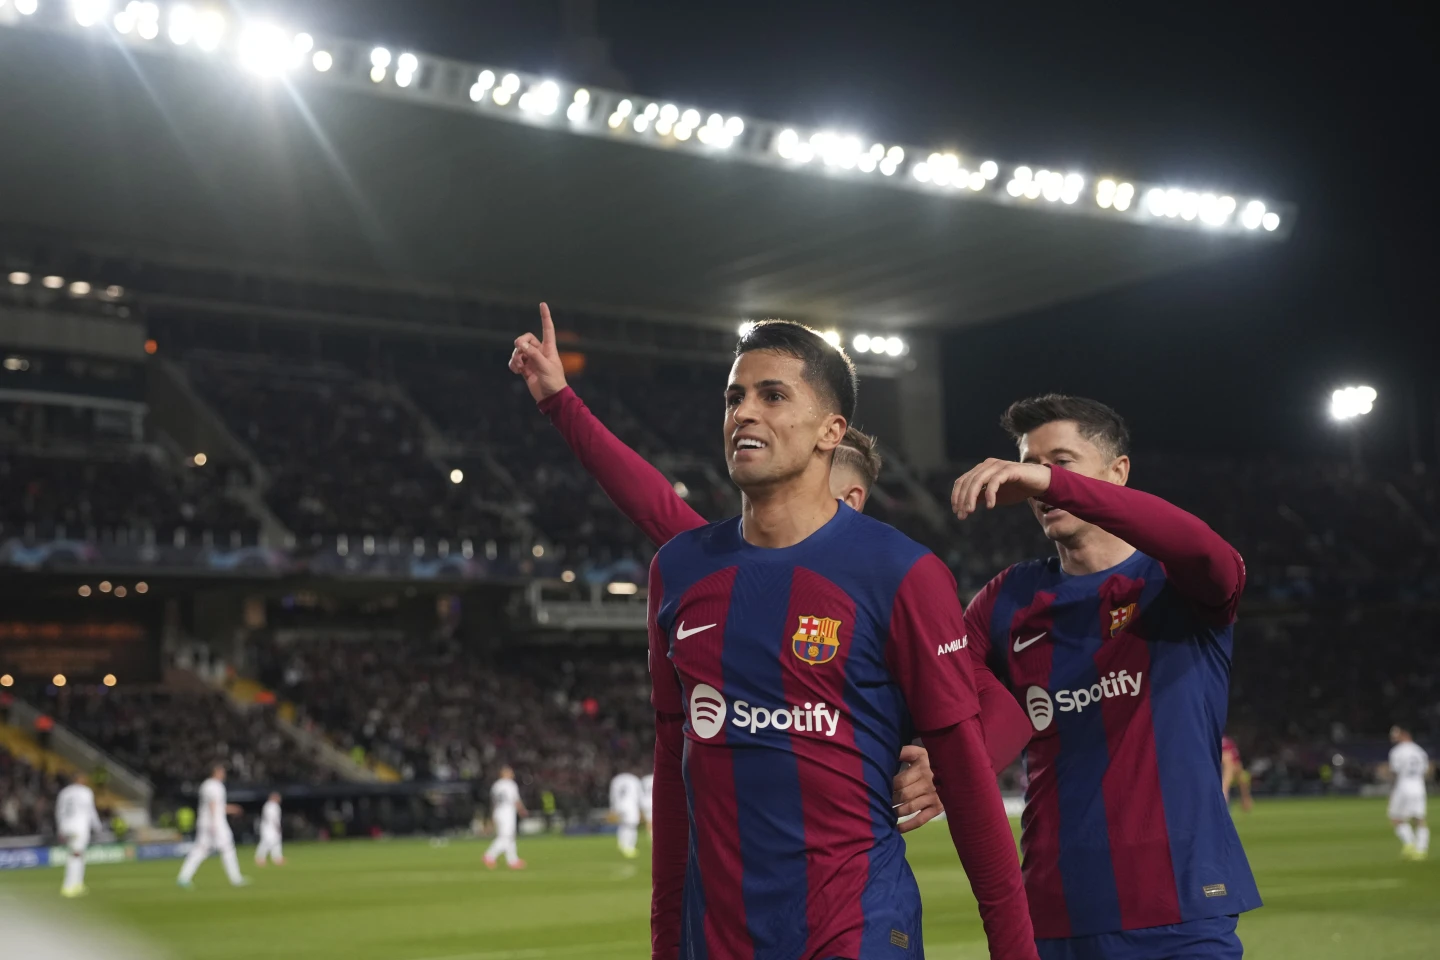 Barcelona back in Champions League quarterfinals after 31 win over